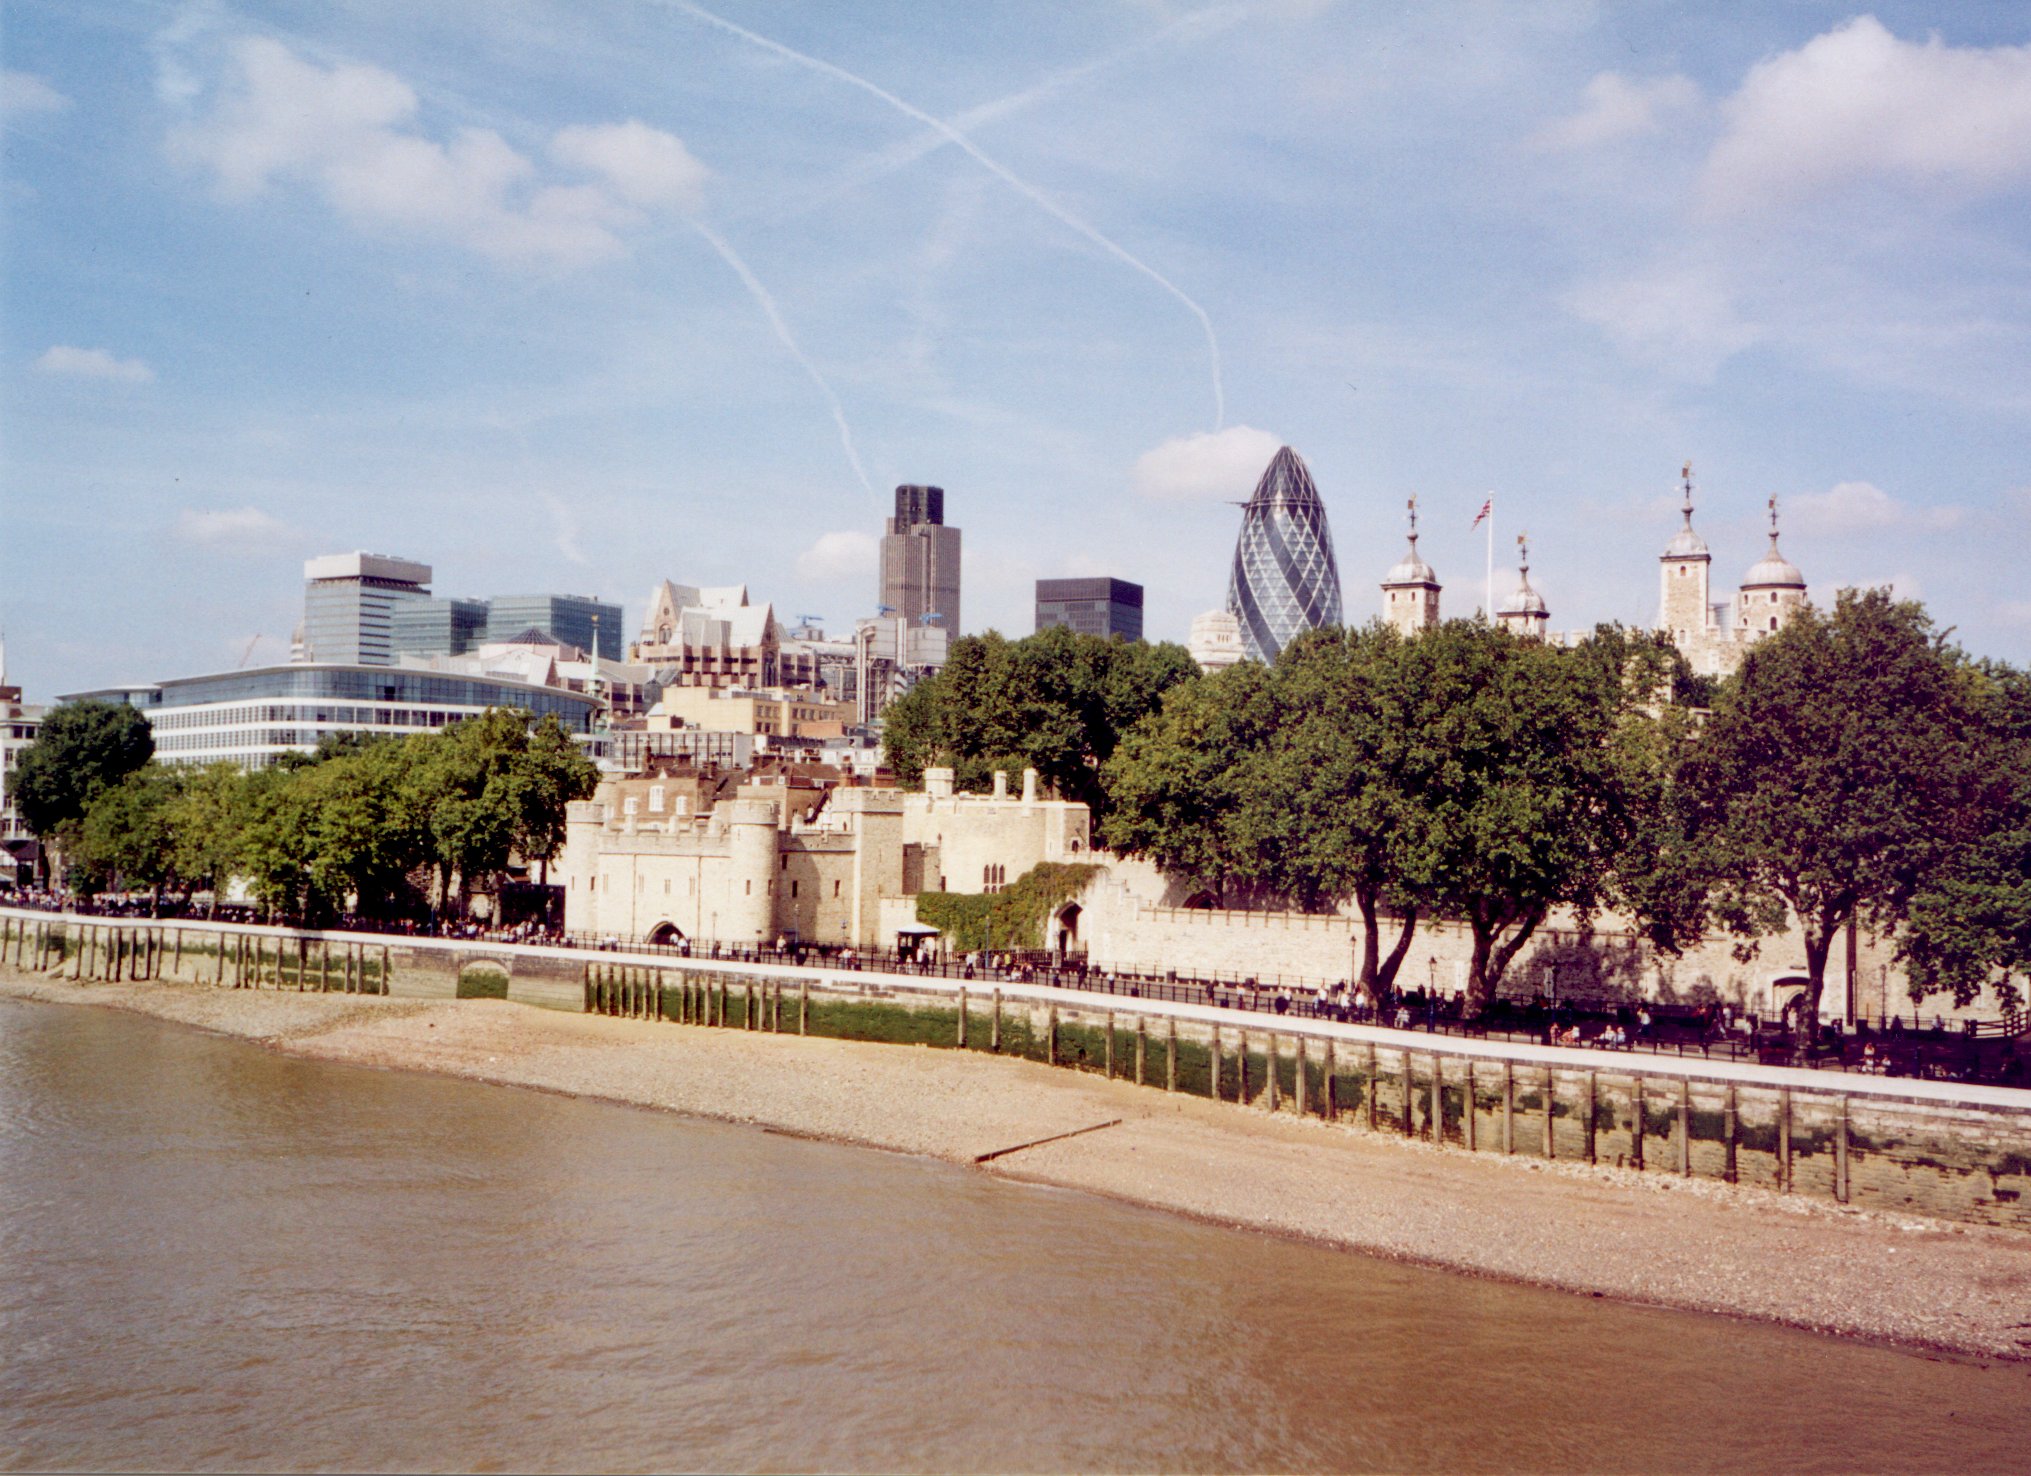 Tower of London backed by office buildings. Photo: Crux, Wikimedia Commons